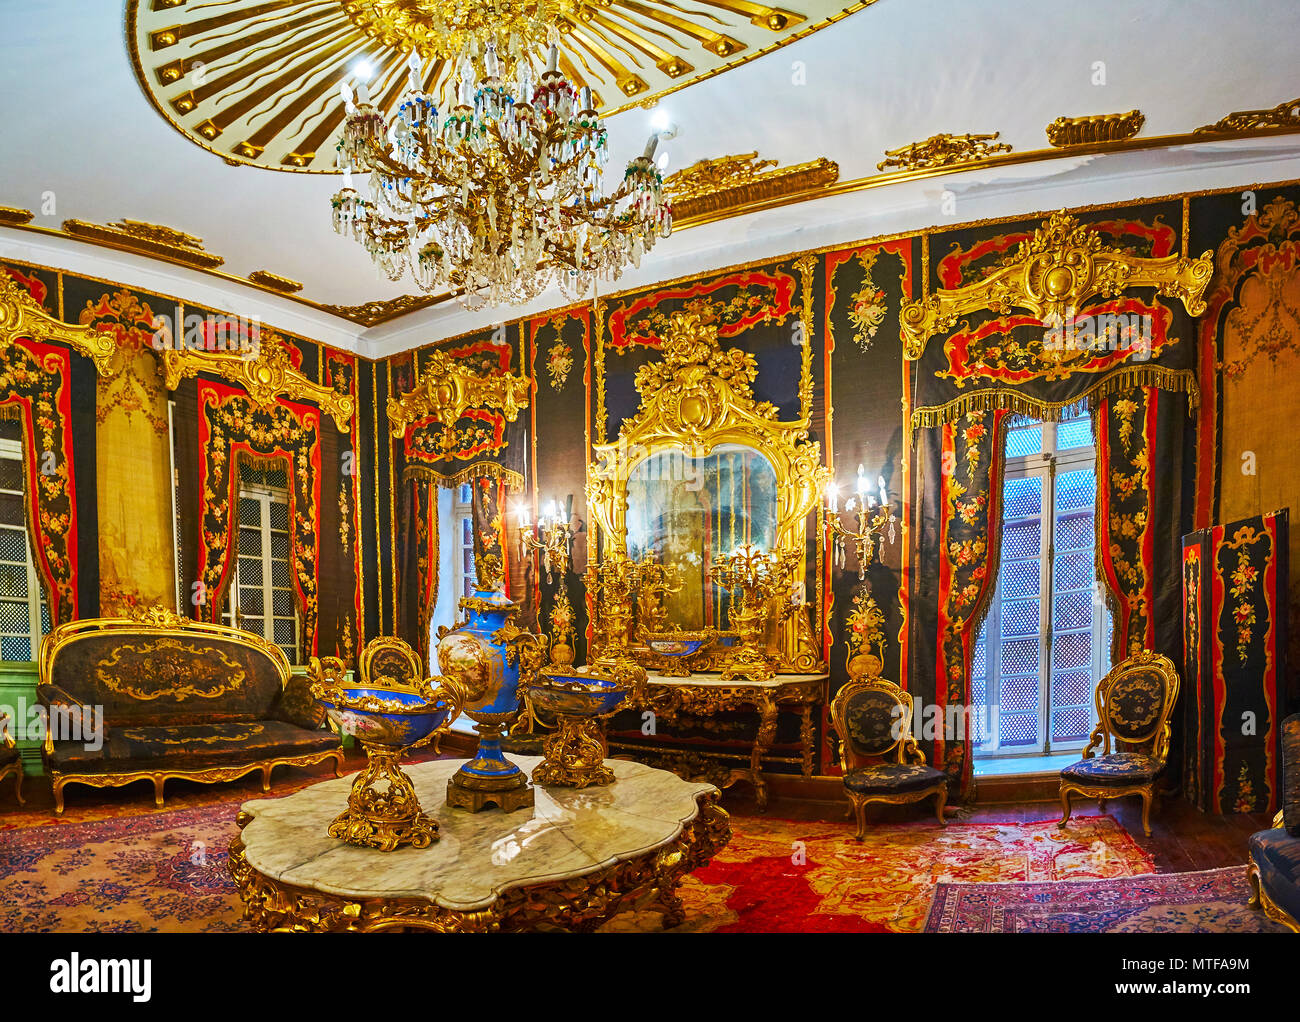 CAIRO, EGYPT - DECEMBER 24, 2017: Panorama of Aubusson Room in Throne Manial Palace with outstanding decoration, historical textiles, furniture, chand Stock Photo